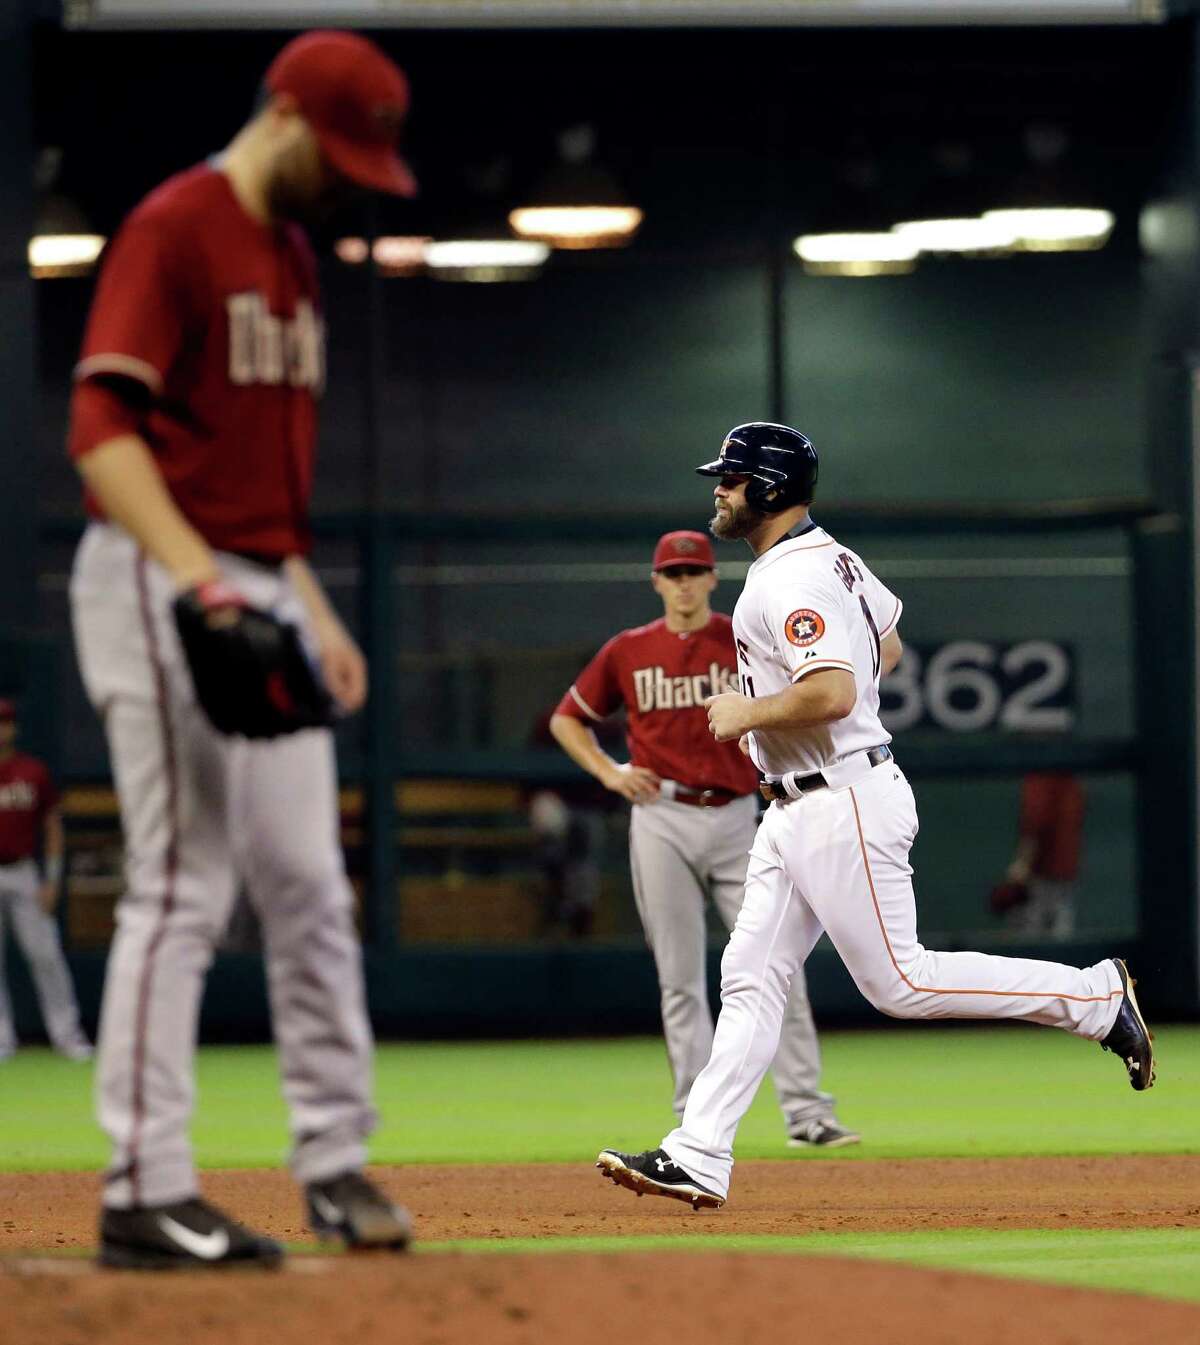 Houston Astros' Evan Gattis, right, runs the bases after hitting a home run off Arizona Diamondbacks starting pitcher Robbie Ray, left, during the fifth inning of a baseball game Sunday, Aug. 2, 2015, in Houston. (AP Photo/David J. Phillip)